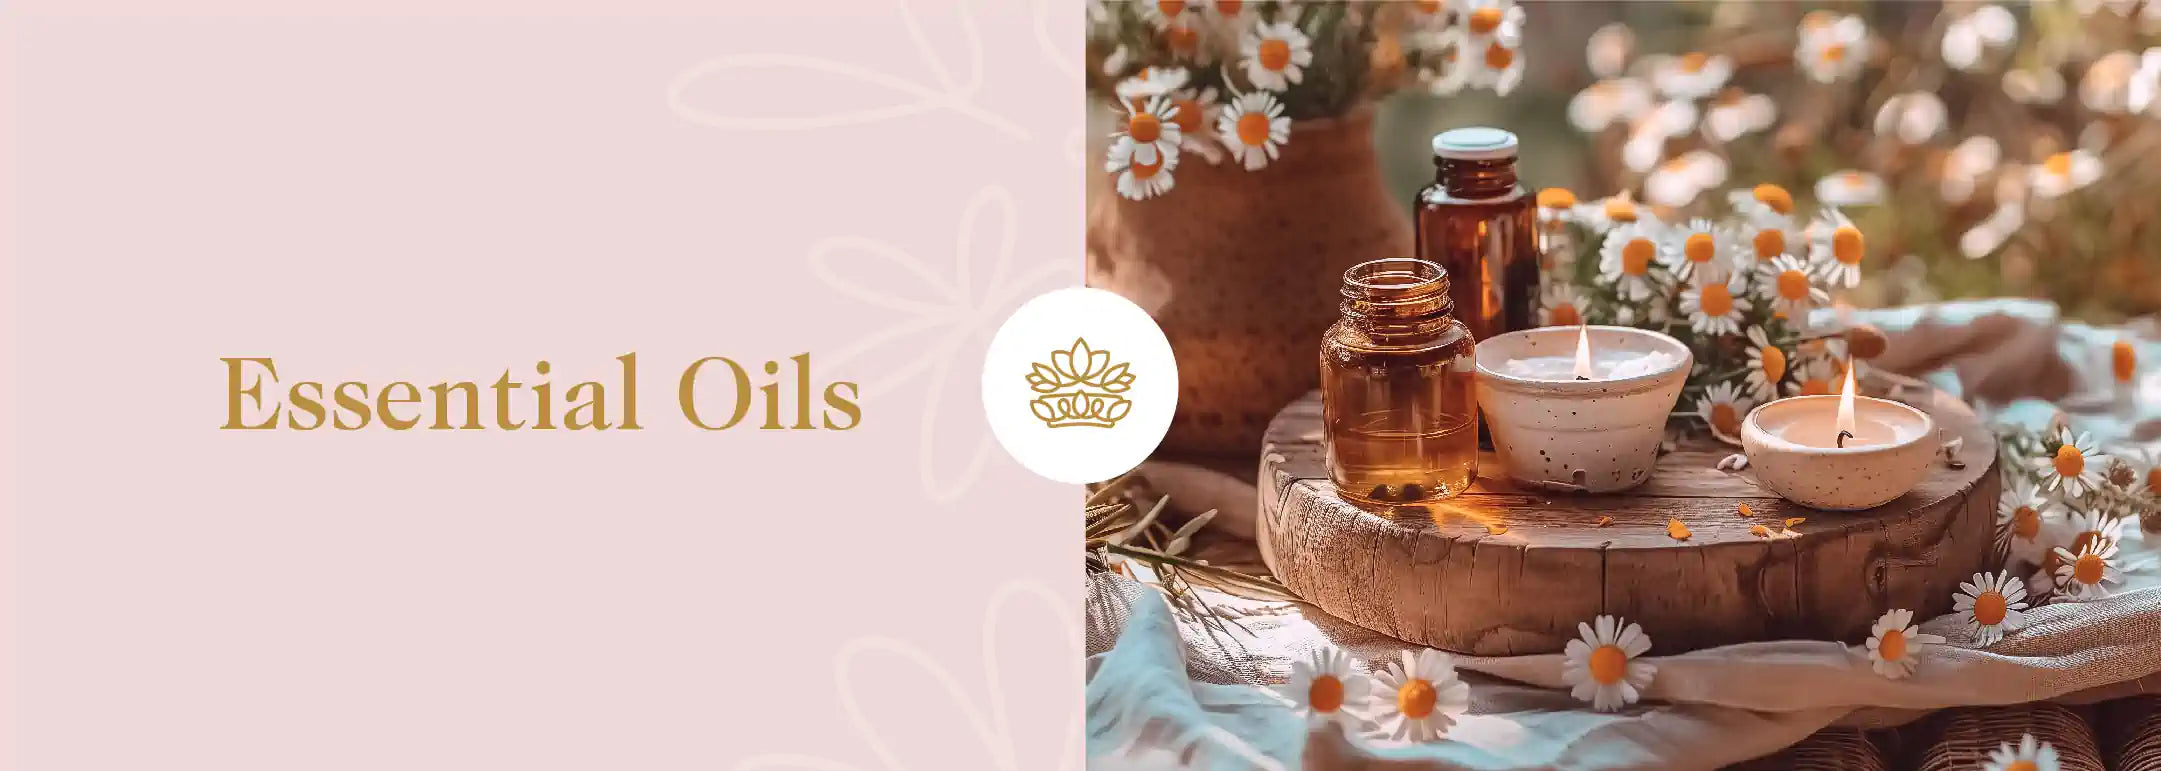 Tranquil setting with essential oil bottles, a lit candle, and fresh chamomile flowers on a rustic wooden table, capturing the essence of natural aromatherapy, available from Fabulous Flowers and Gifts.